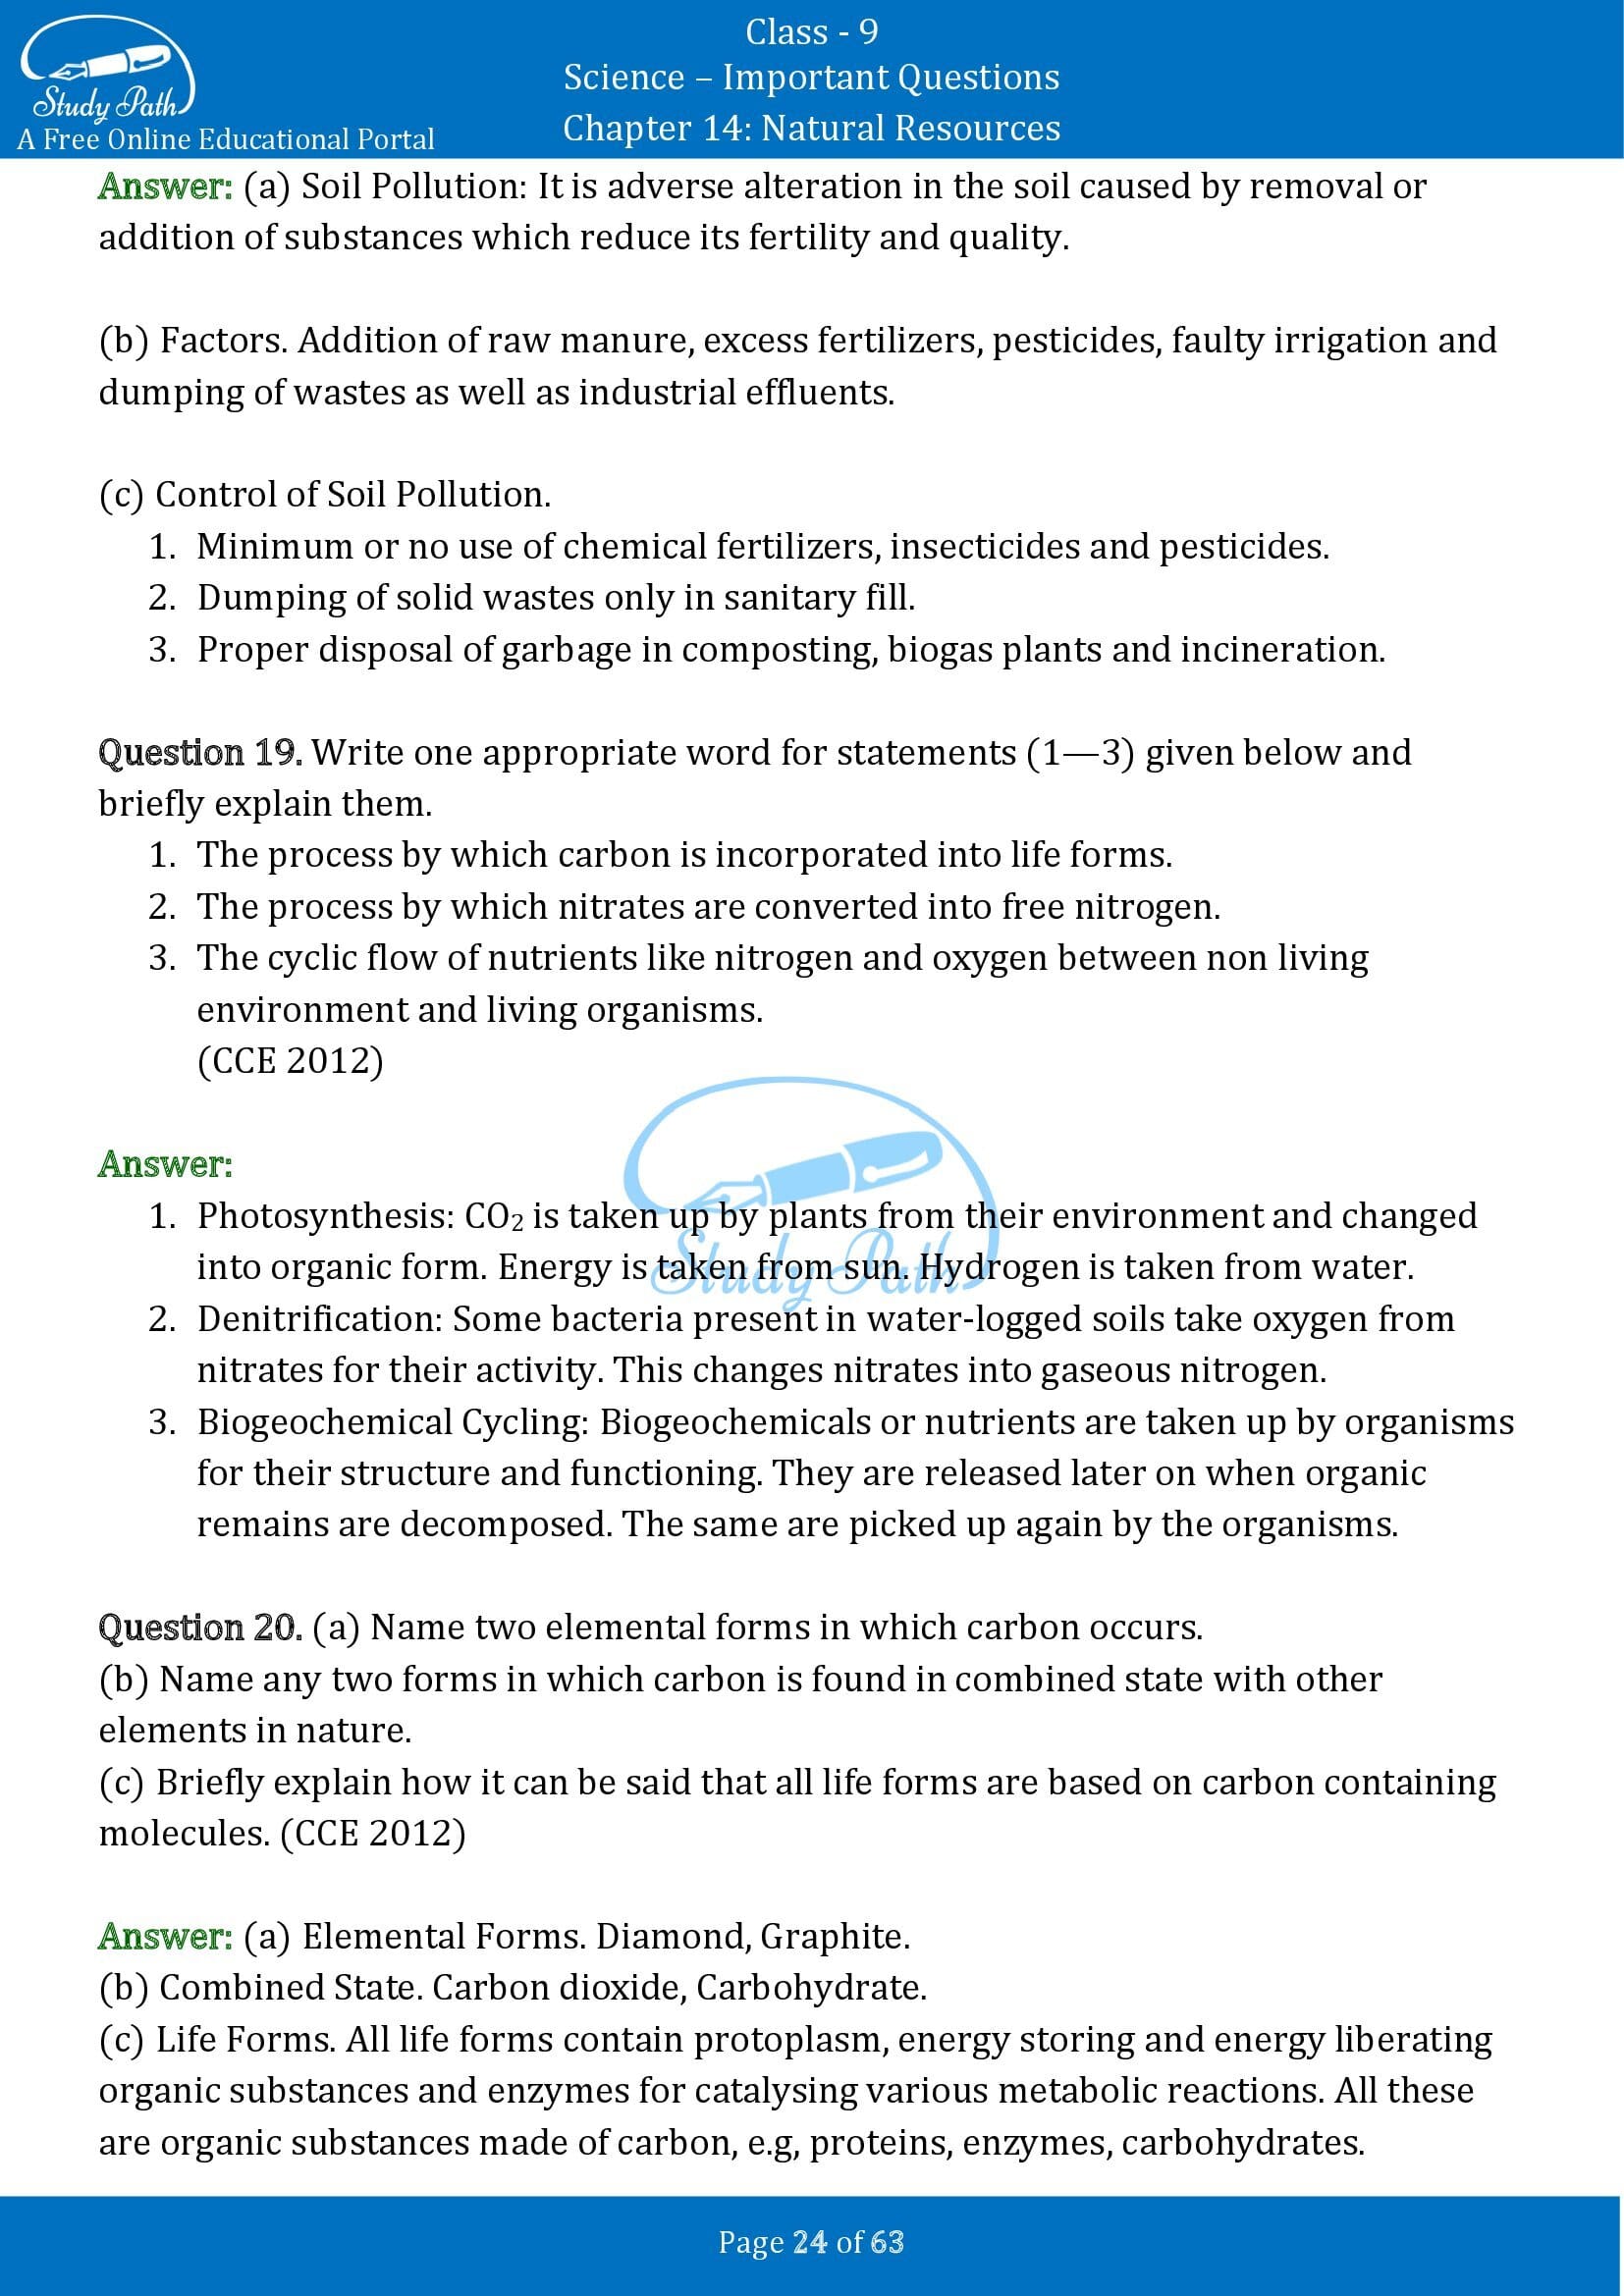 Important Questions for Class 9 Science Chapter 14 Natural Resources 00024